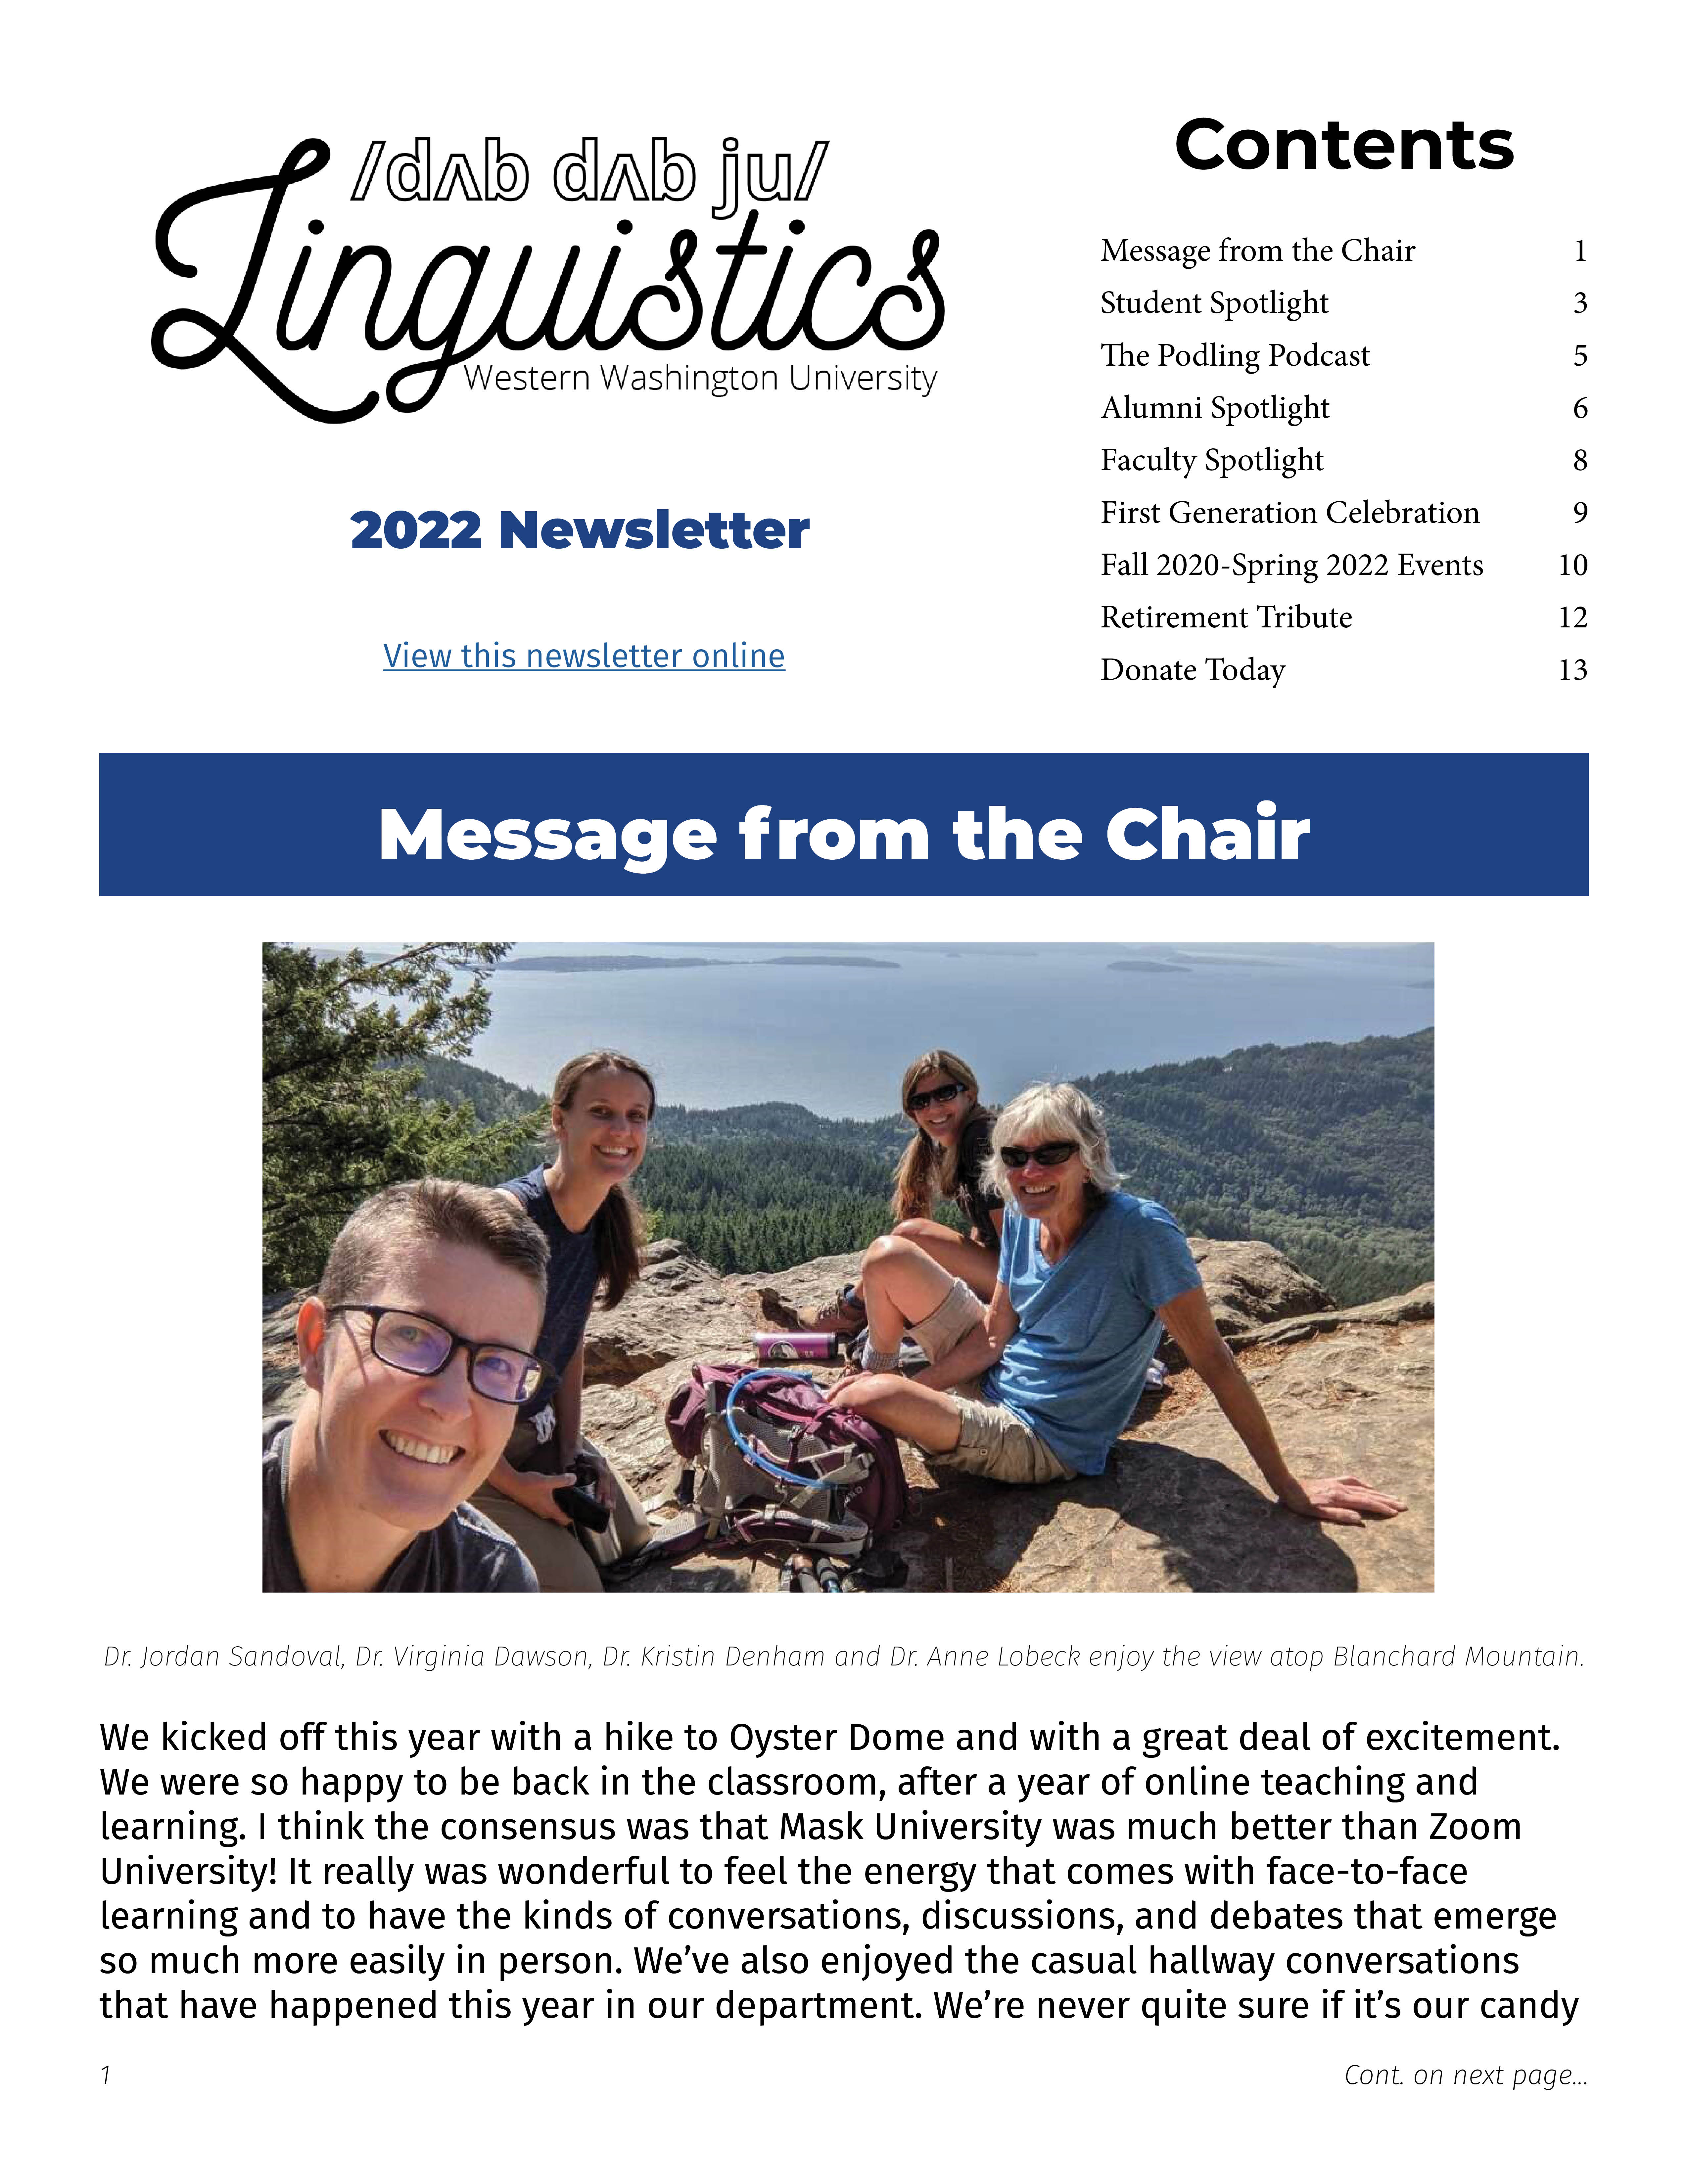 Cover image of Western's Department of Linguistics 2022 Newsletter. Complete contents of image can be found through link to full newsletter